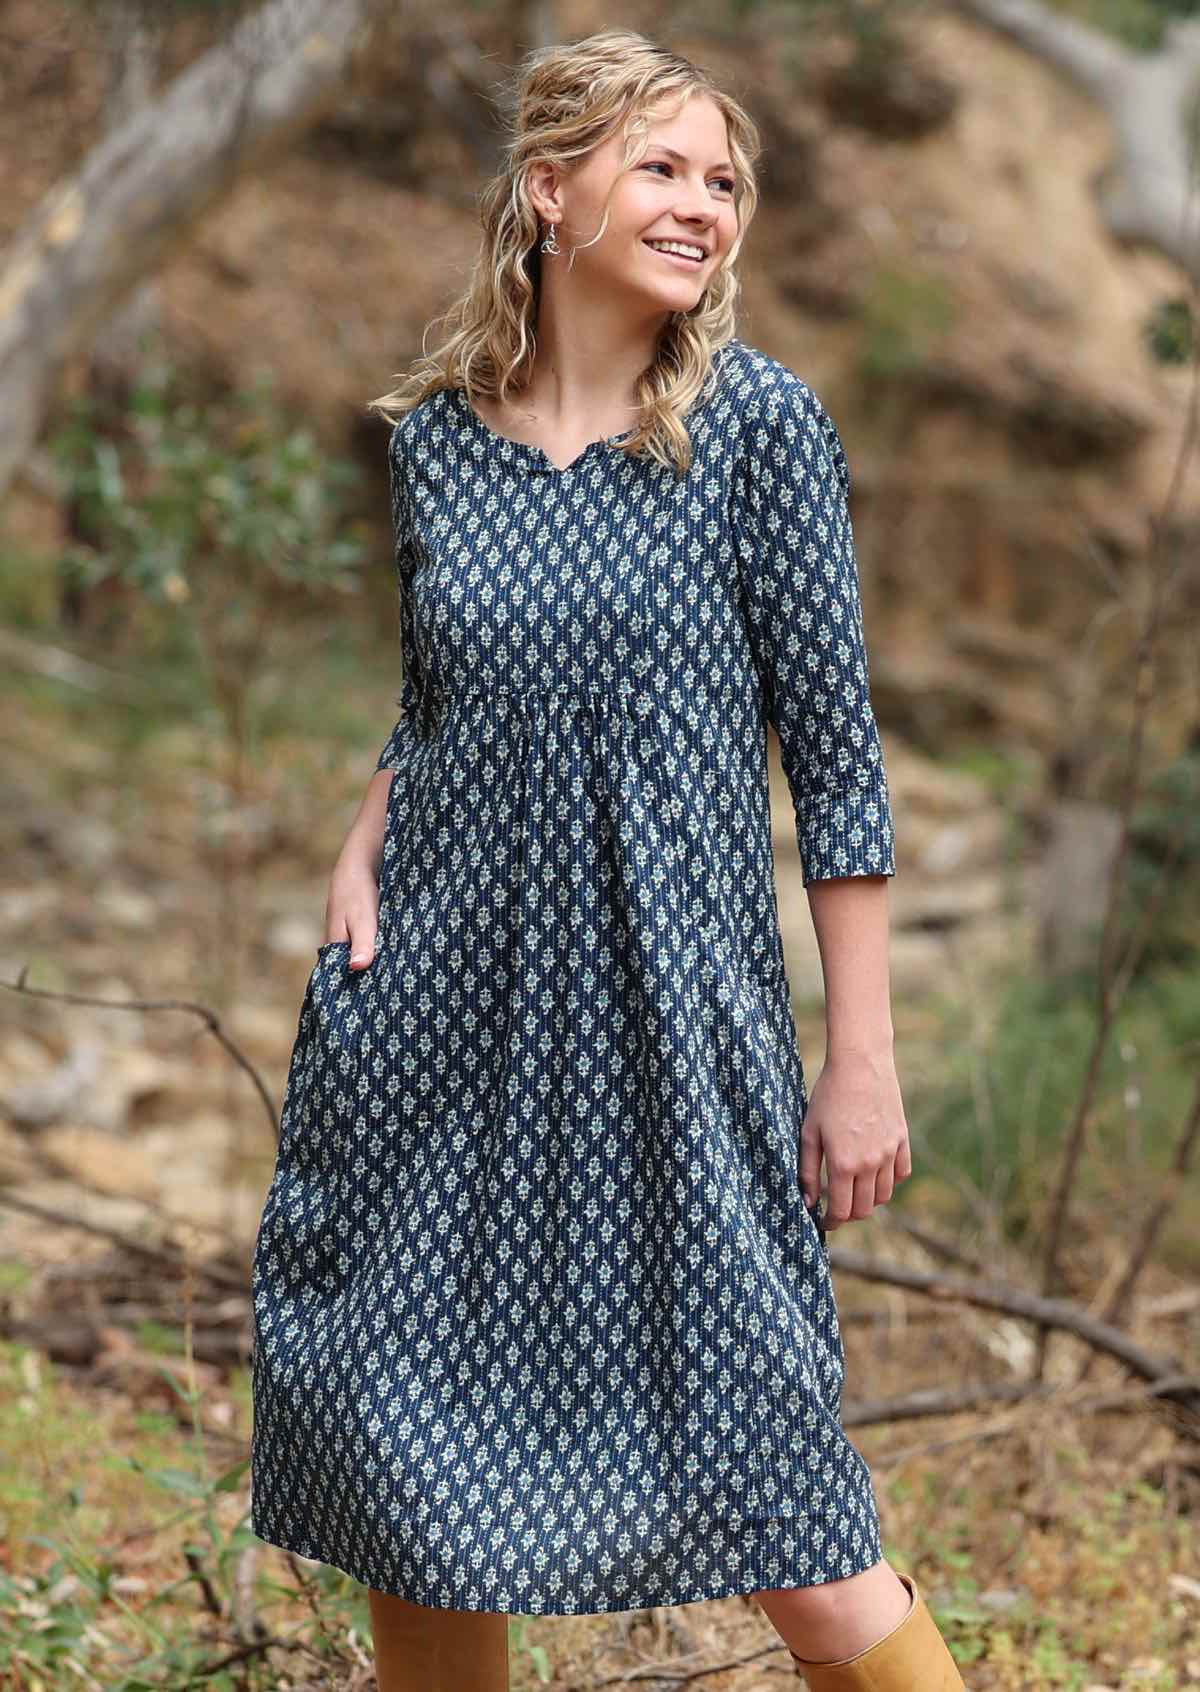 Cotton dress with 3/4 sleeves, lining, pockets and cutout in the neckline